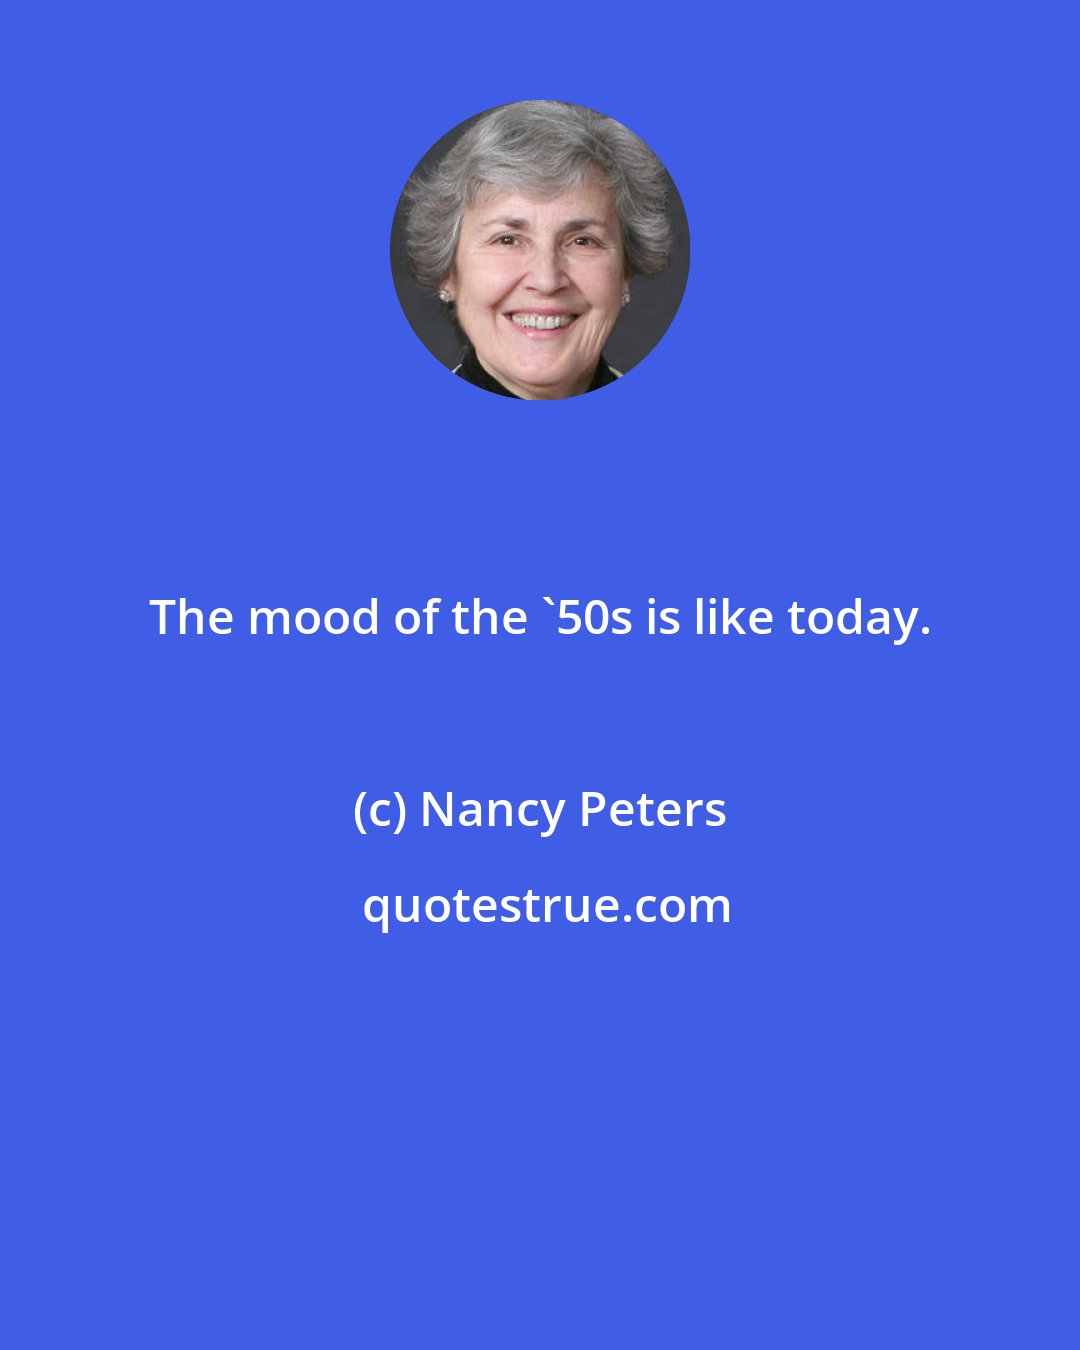 Nancy Peters: The mood of the '50s is like today.